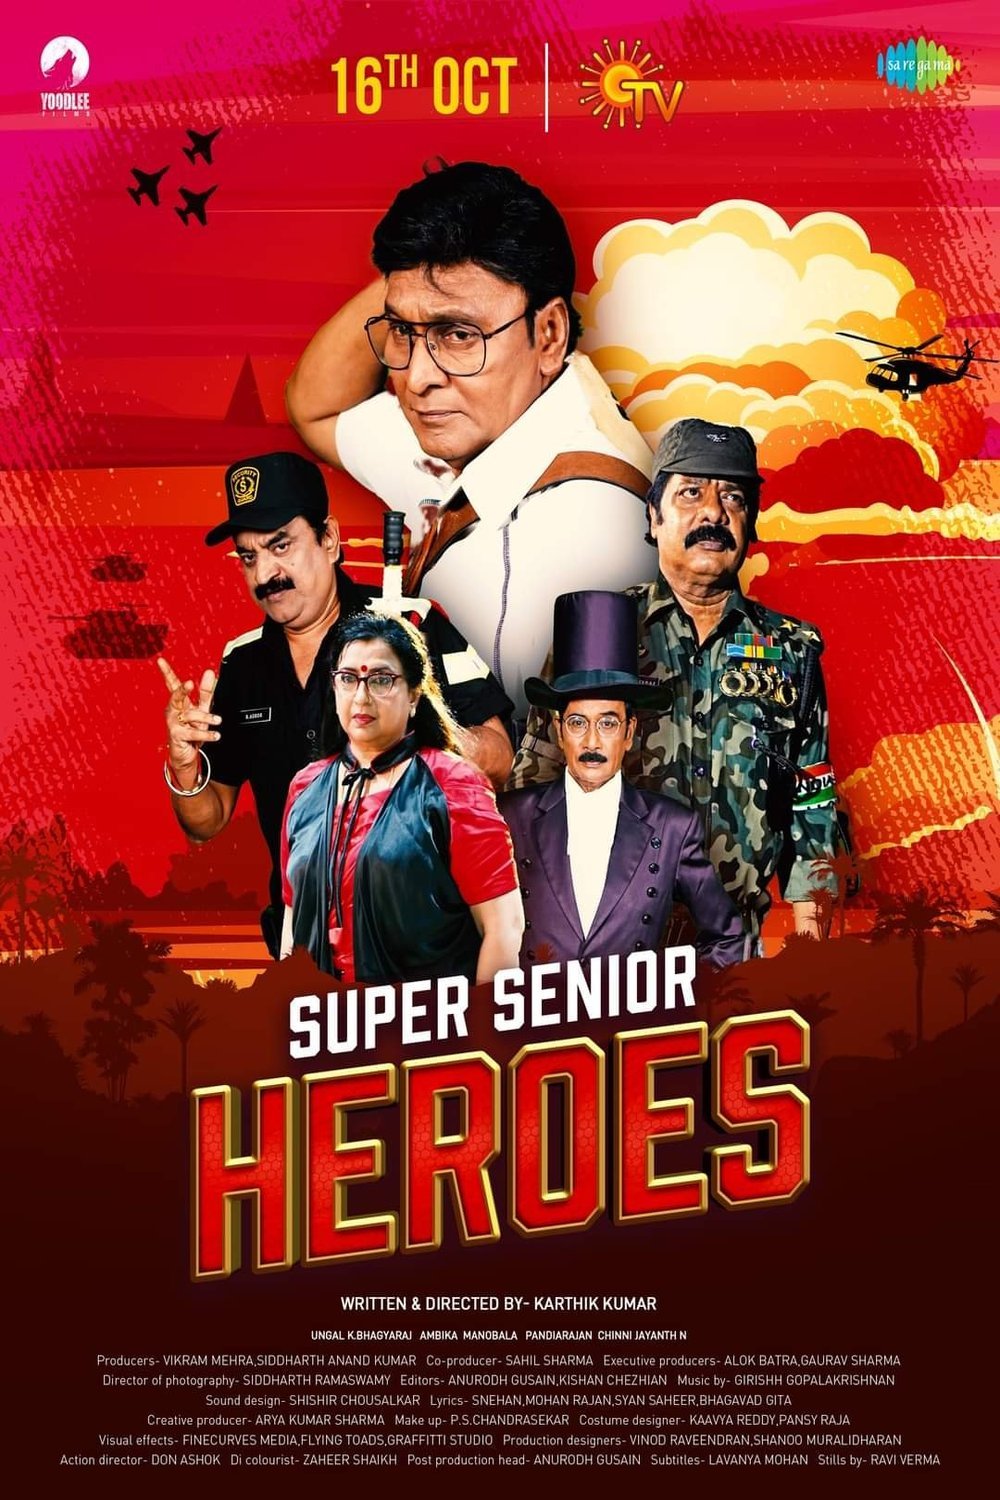 Tamil poster of the movie Super Senior Heroes